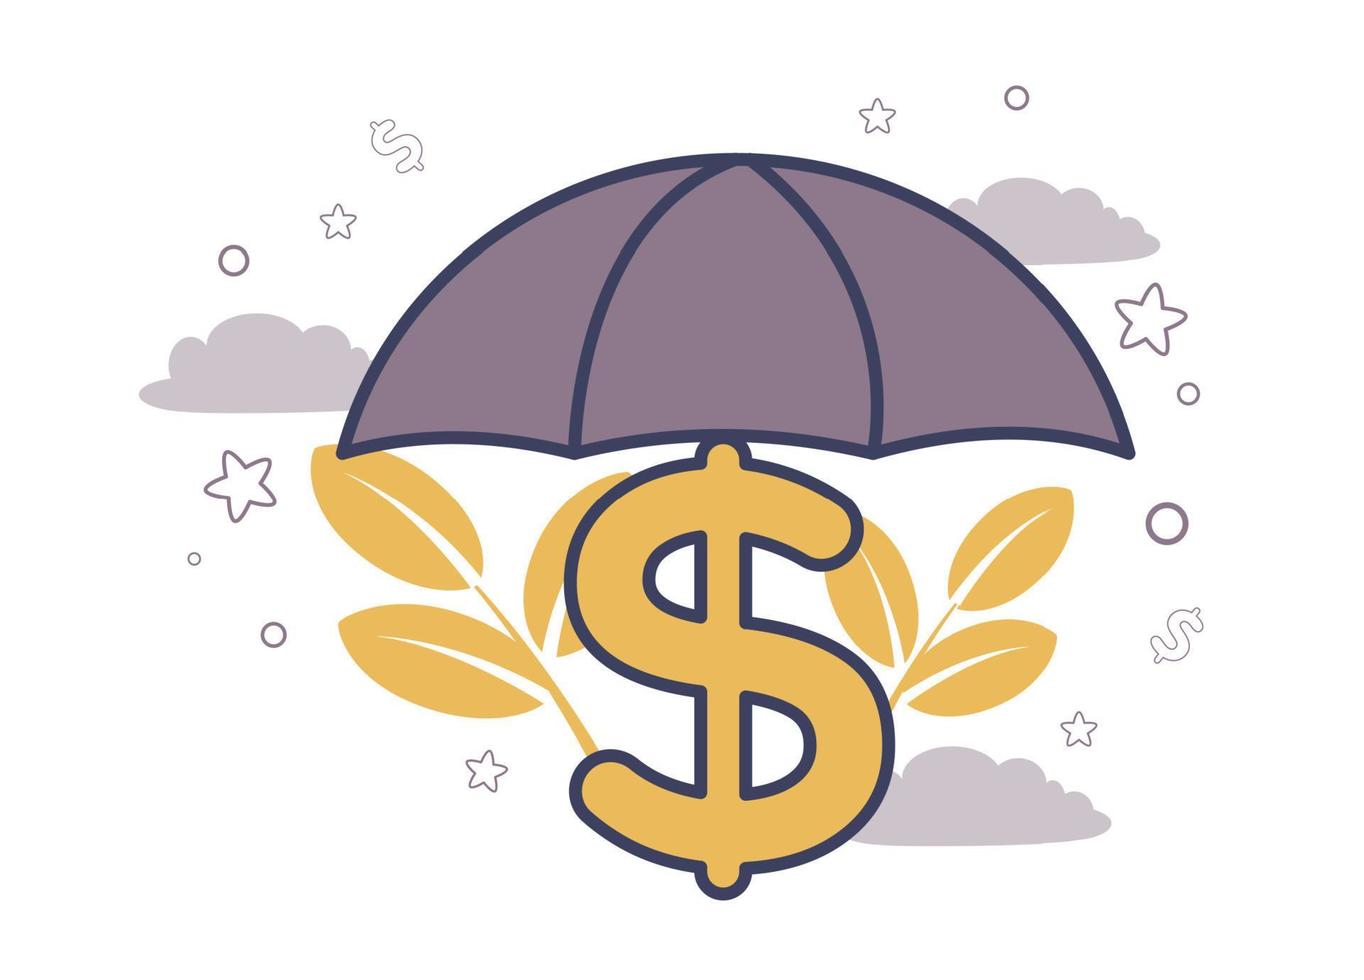 Financial services. Insurance. Illustration of an umbrella with a dollar sign on a background of branches with leaves, stars, clouds. vector